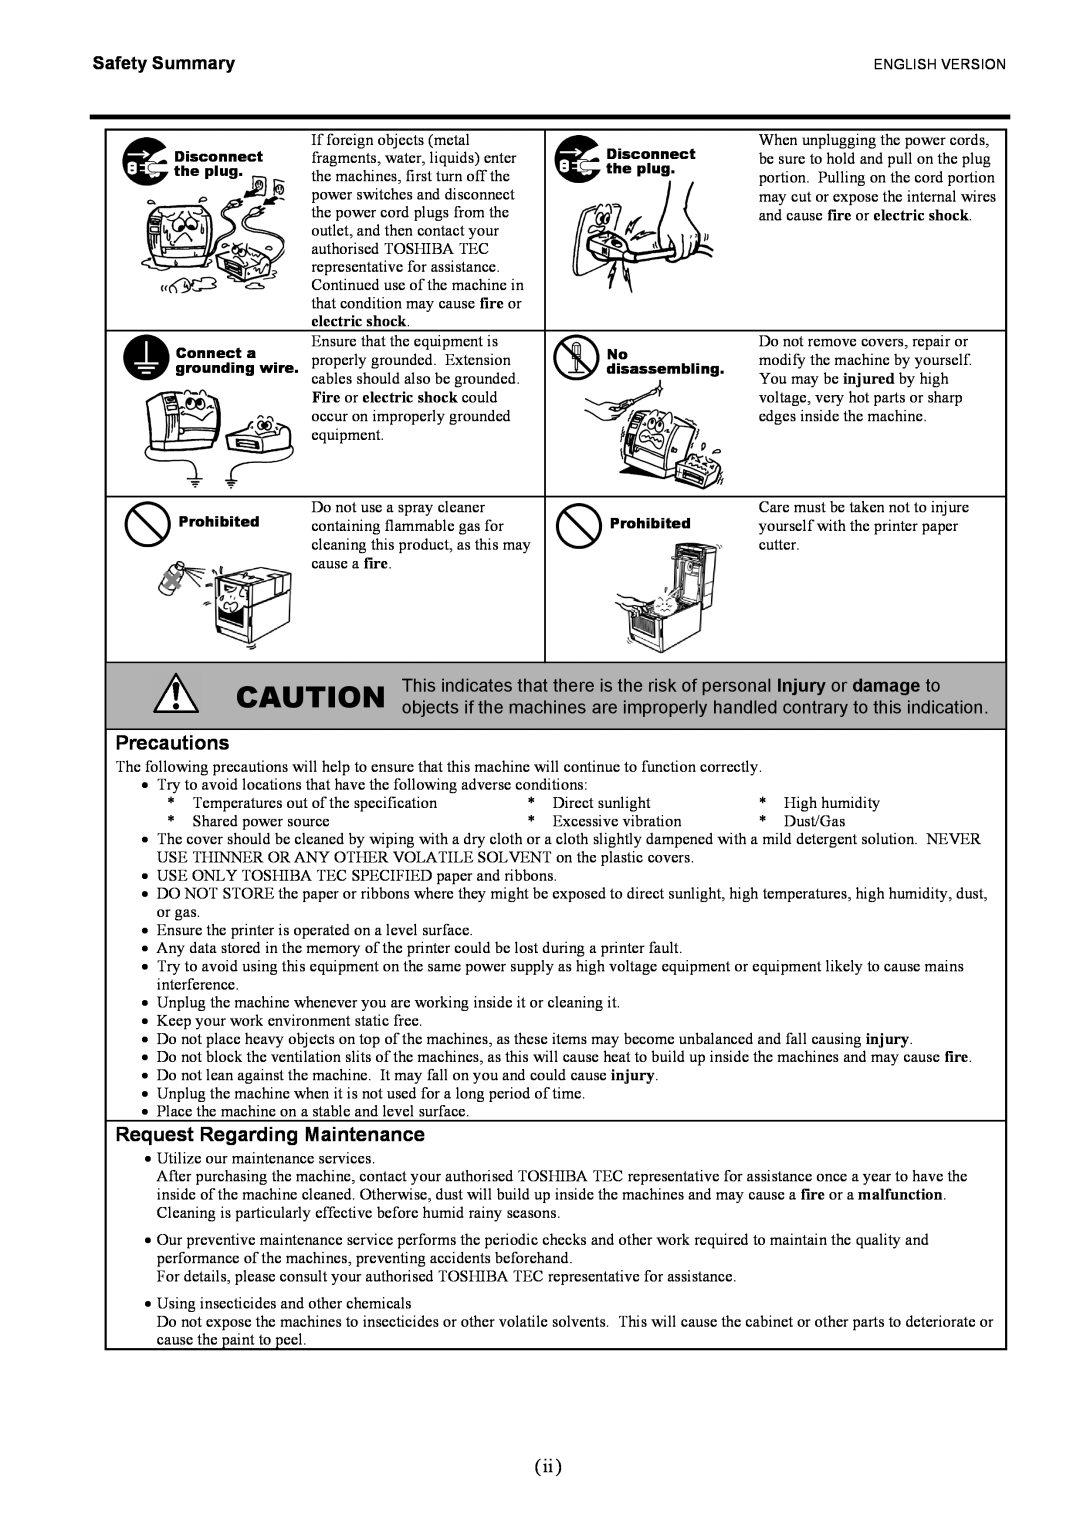 Toshiba B-EX4T1 manual Precautions, Request Regarding Maintenance, Safety Summary, and cause fire or electric shock 